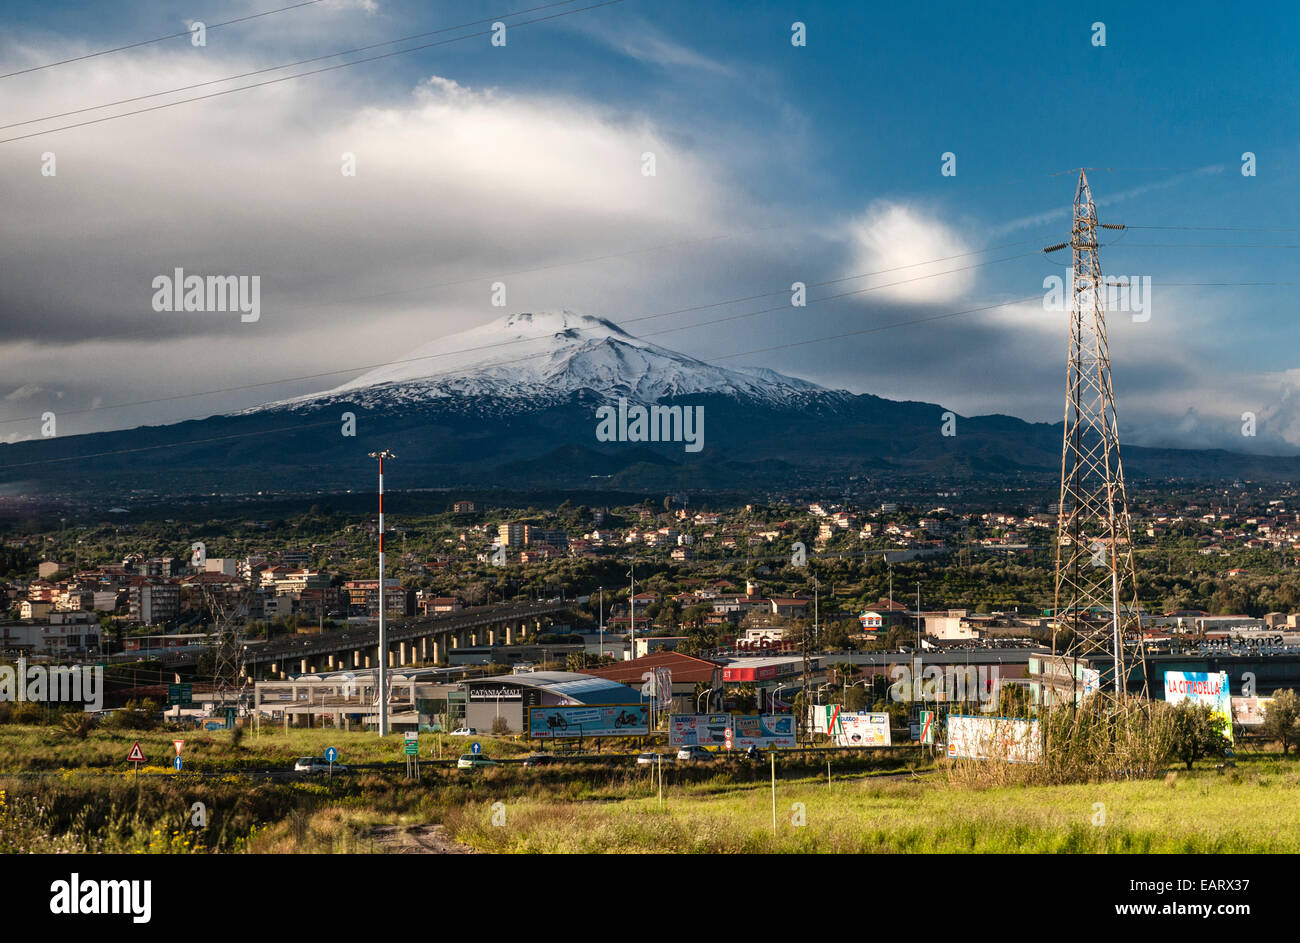 Sicily, Italy. The snow-capped volcano of Mount Etna (3357m) towers over the city of Catania Stock Photo